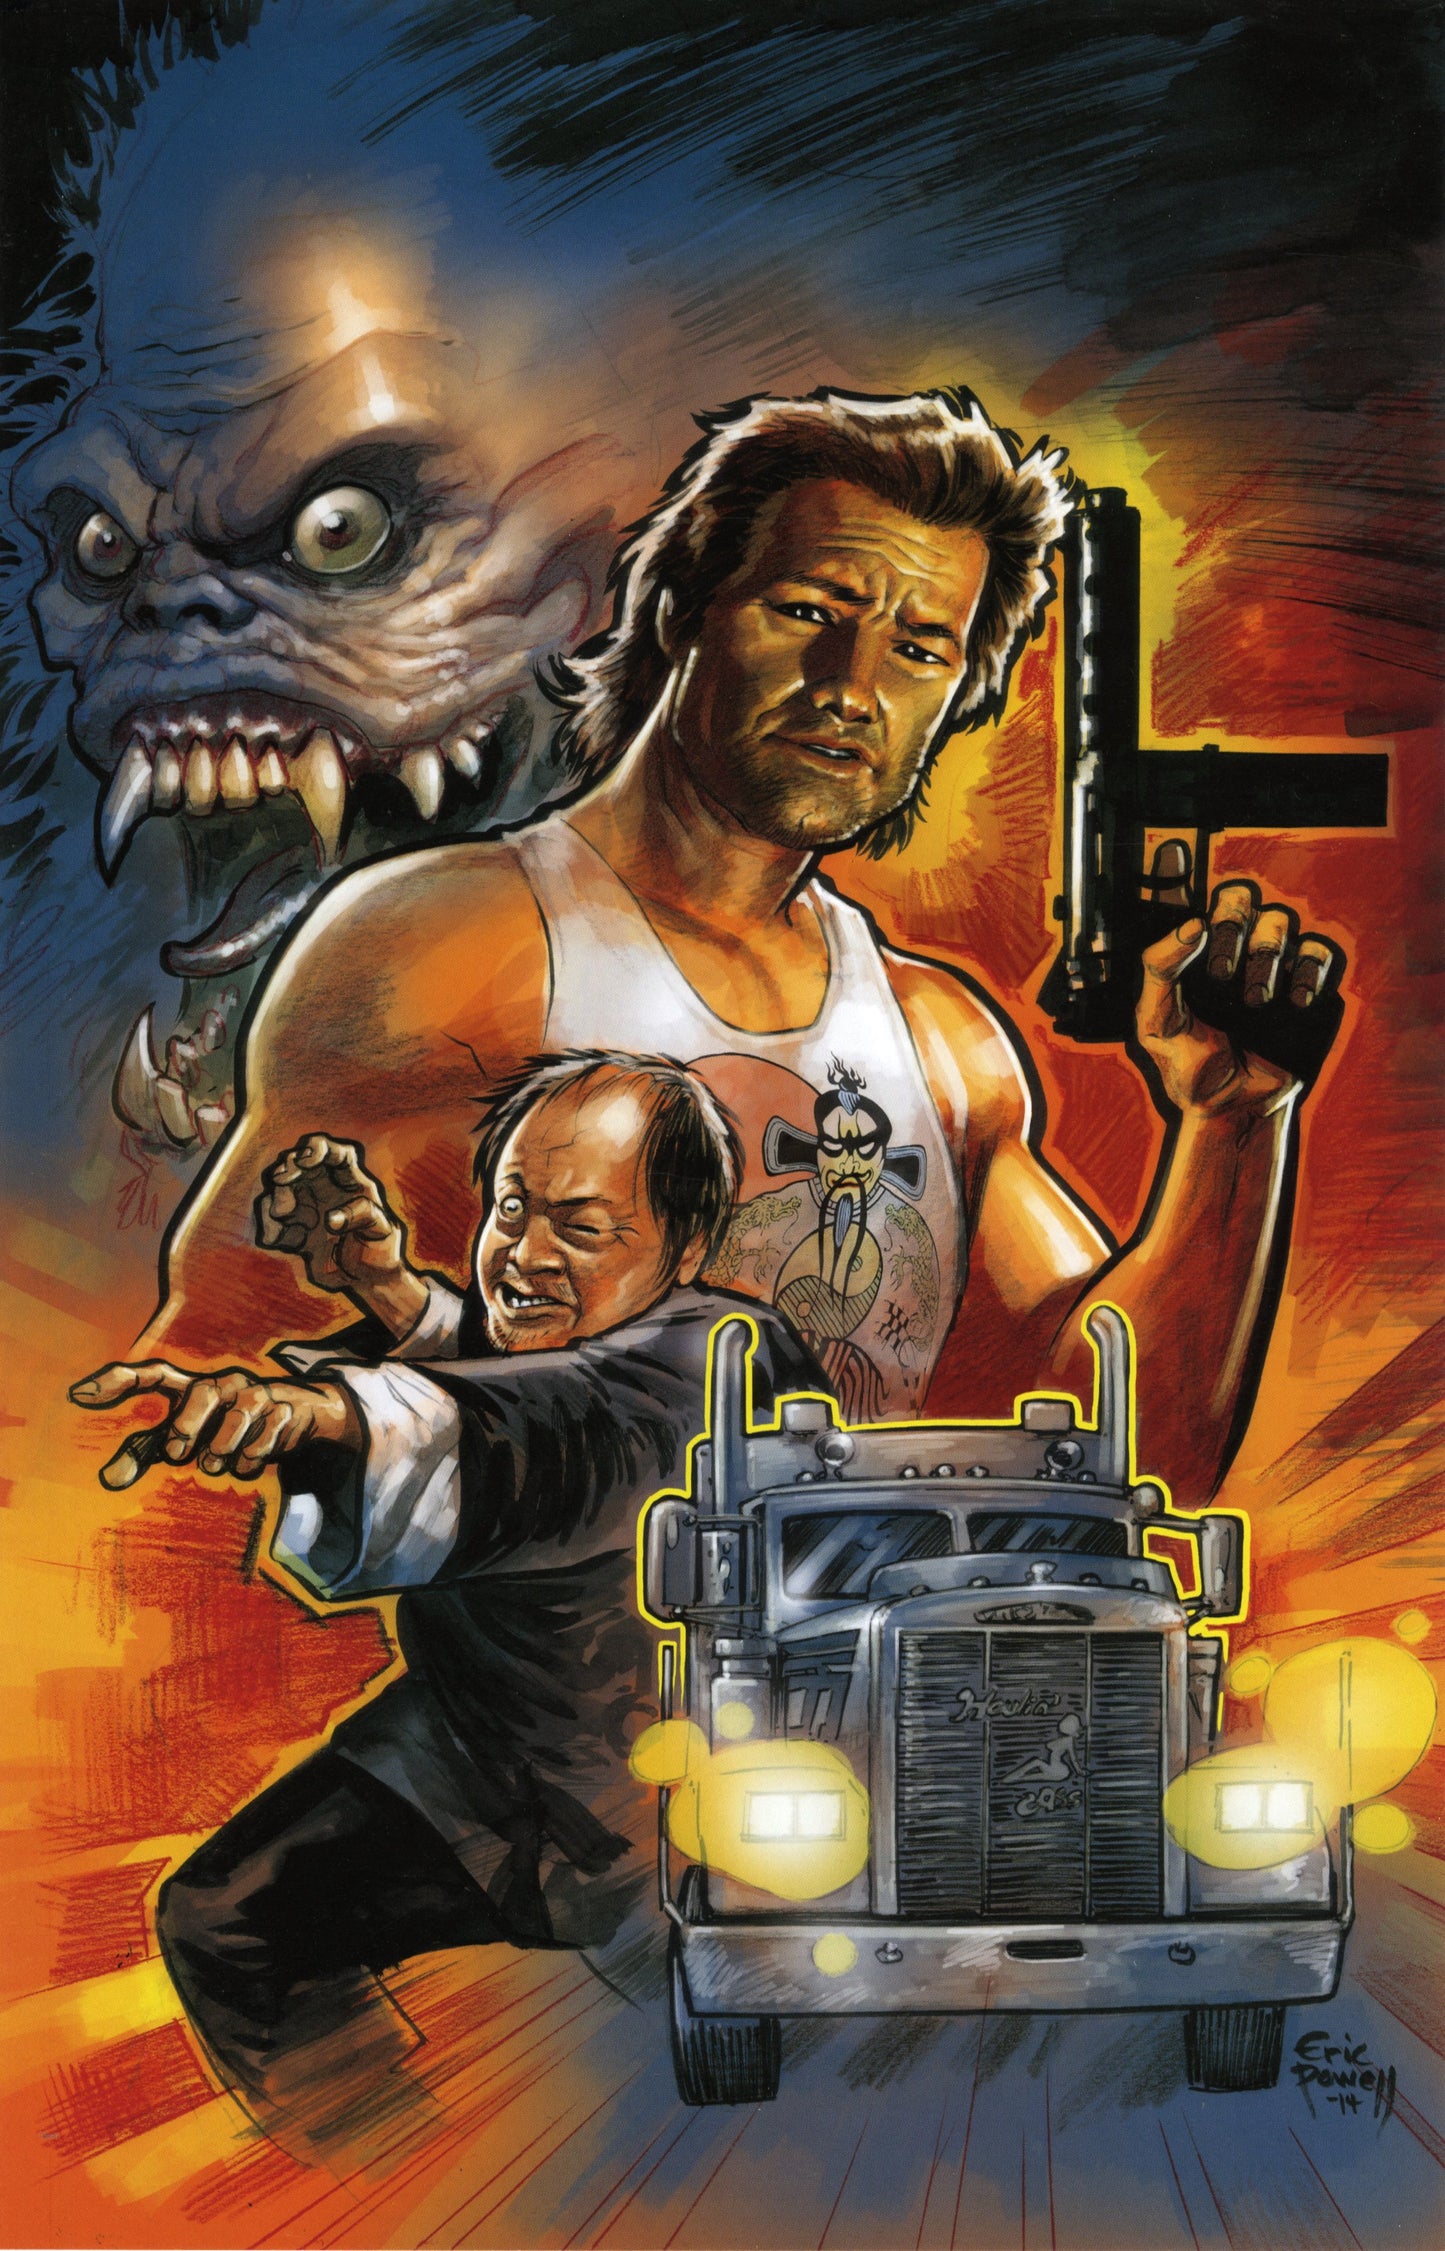 Big Trouble in Little China #1 Print